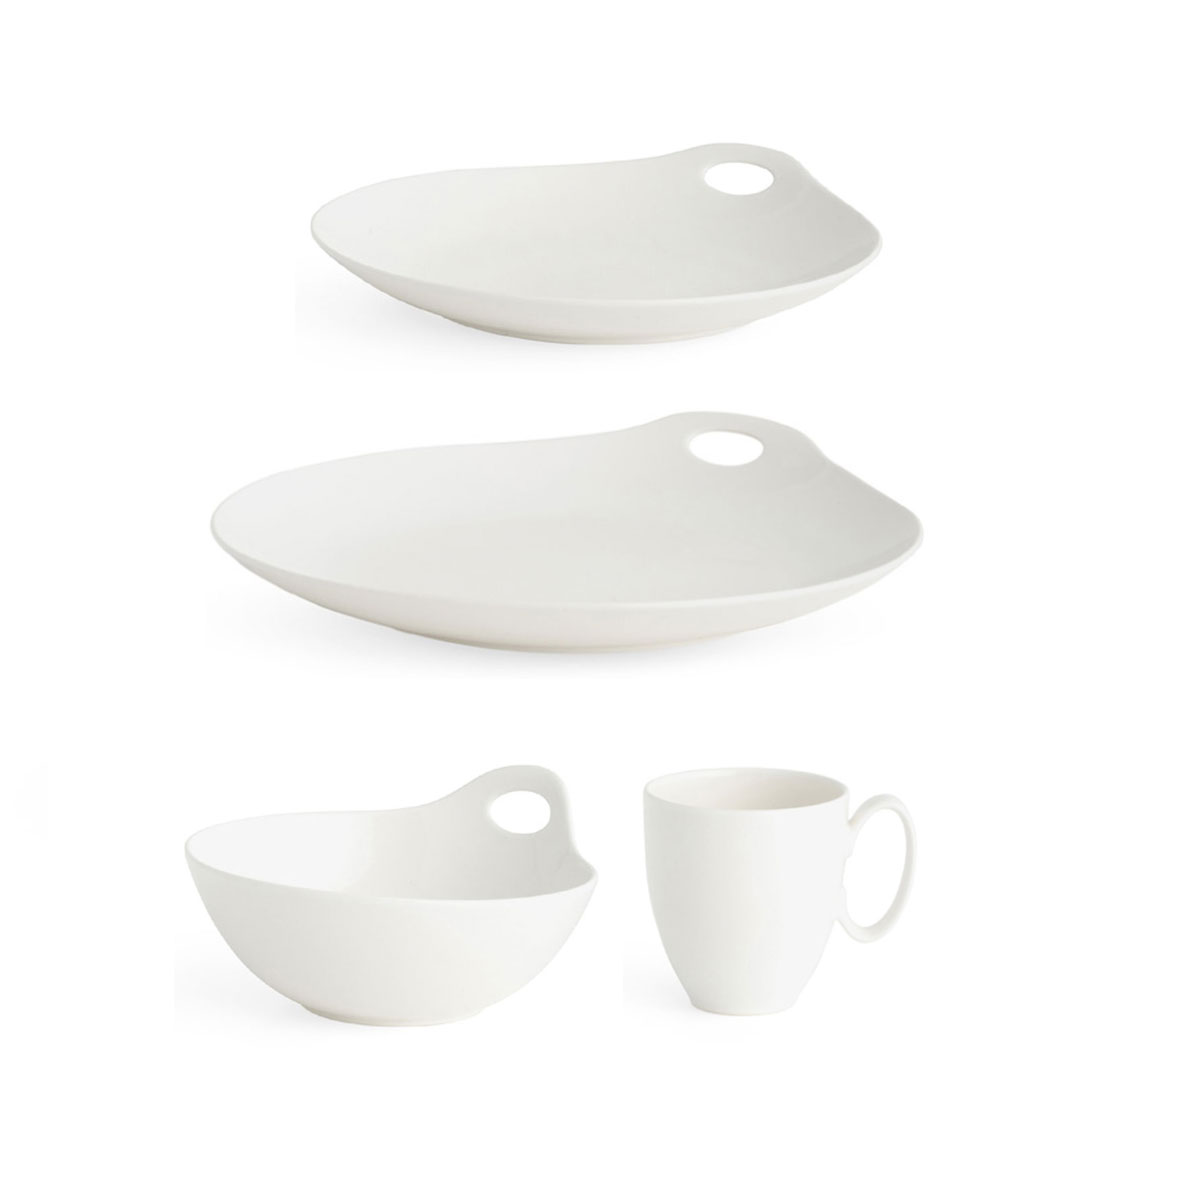 Nambe Portables 4 Piece Place Setting